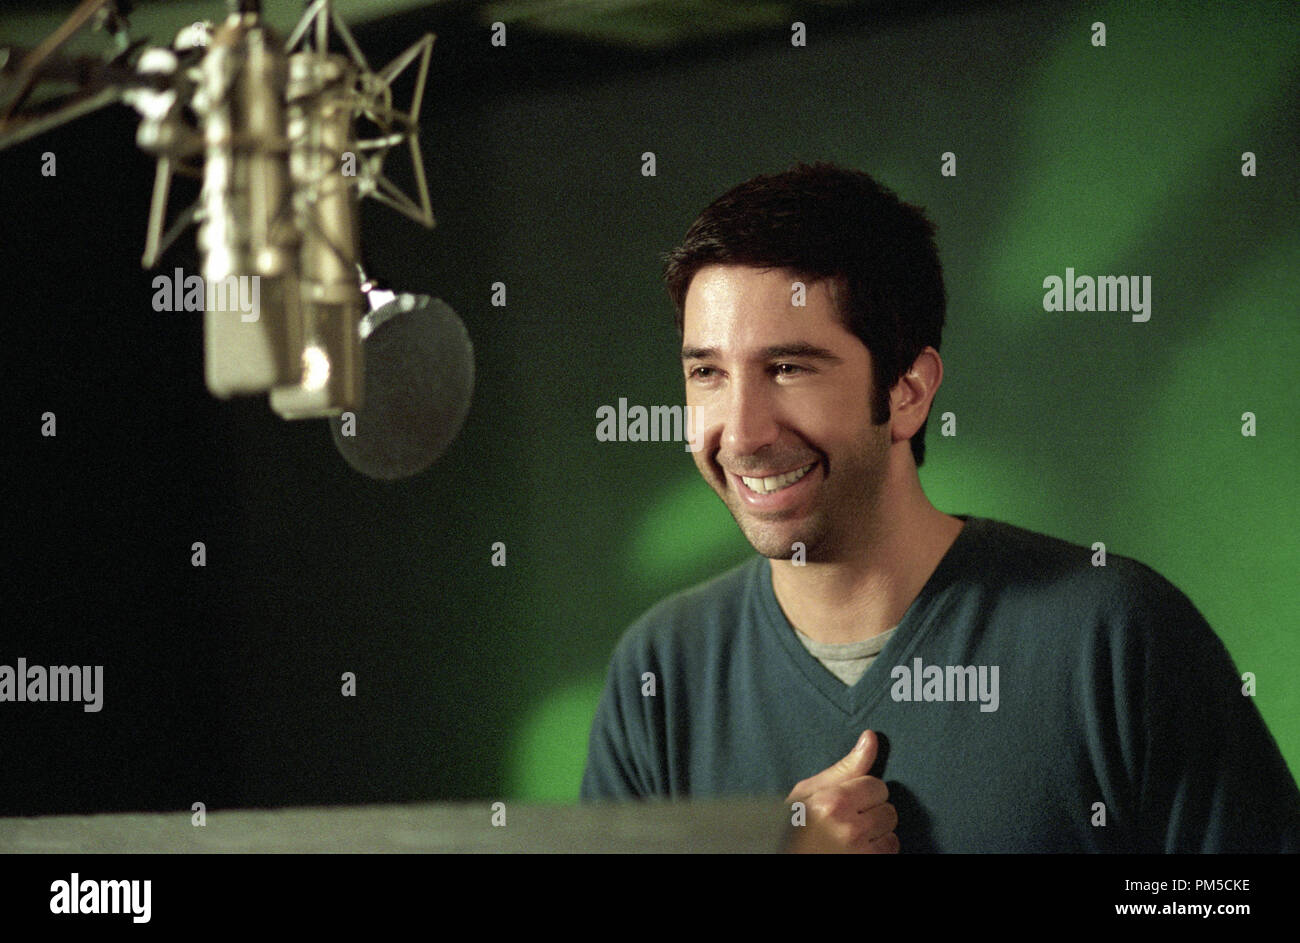 Film Still / Publicity Still from "Madagascar"  David Schwimmer © 2005 Dream Works  Photo courtesy Dream Works Animation SKG    File Reference # 307361121THA  For Editorial Use Only -  All Rights Reserved Stock Photo